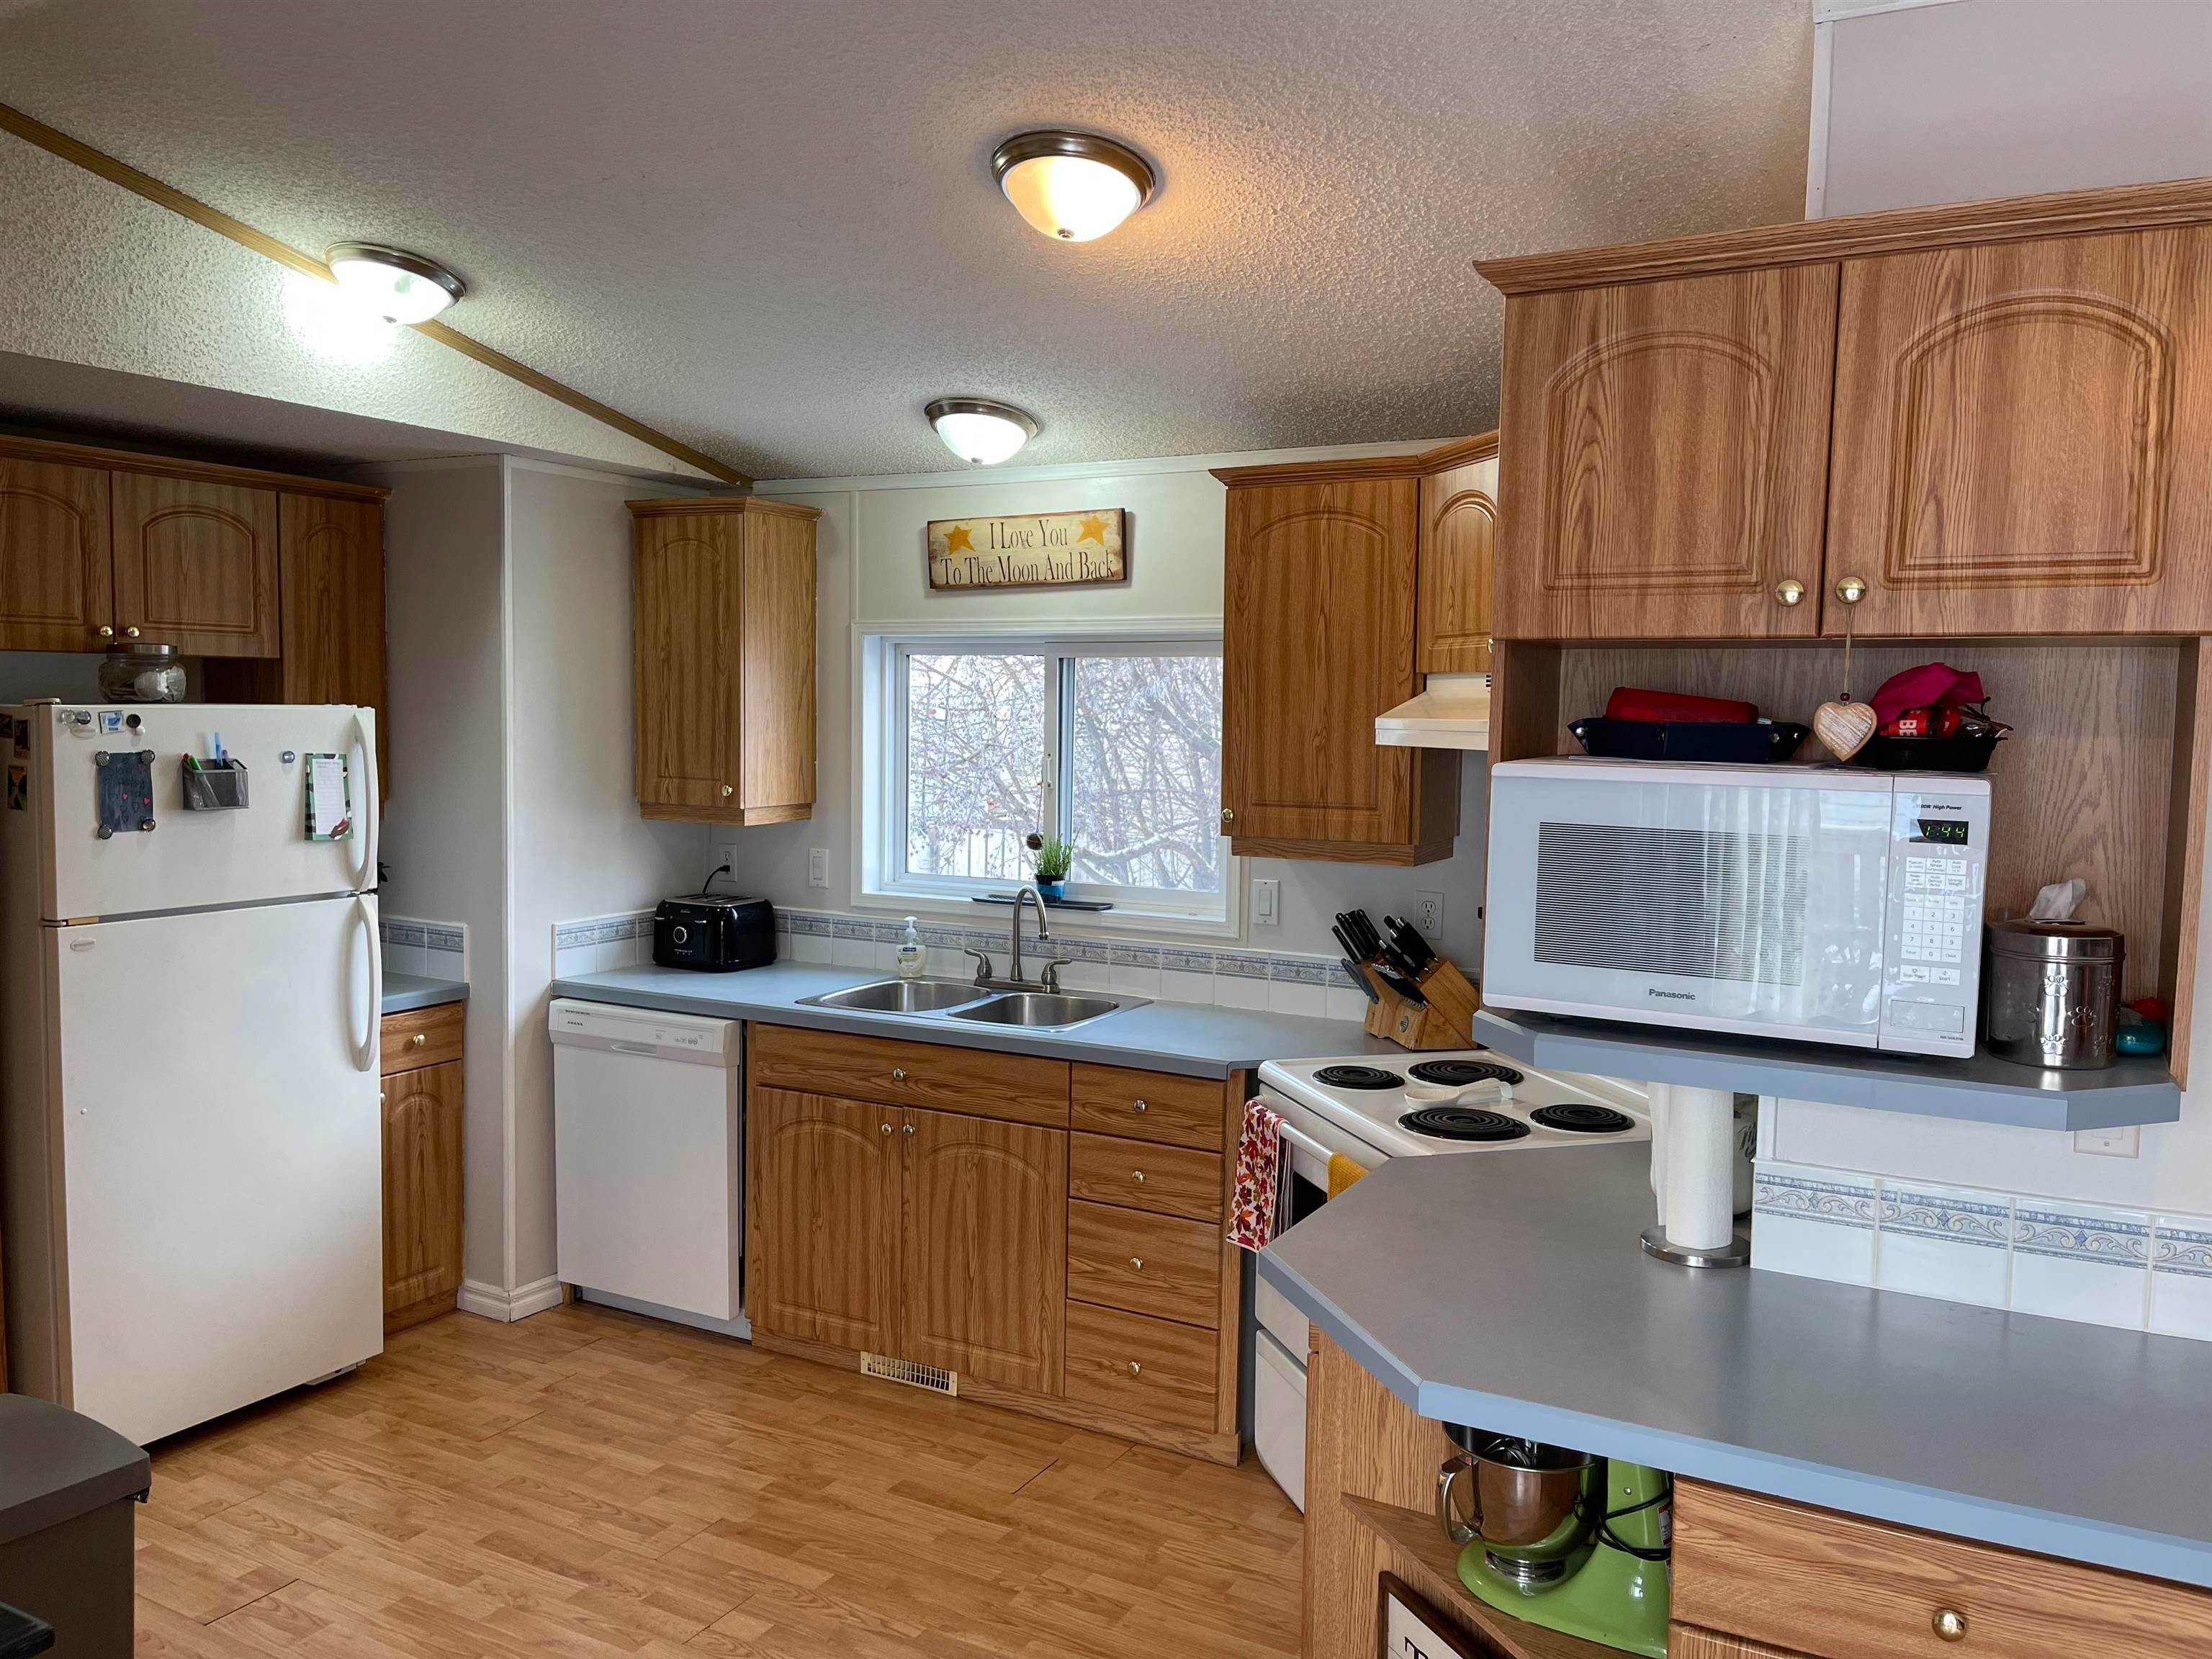 Photo 3: Photos: 10339 99 Street: Taylor Manufactured Home for sale (Fort St. John (Zone 60))  : MLS®# R2632849